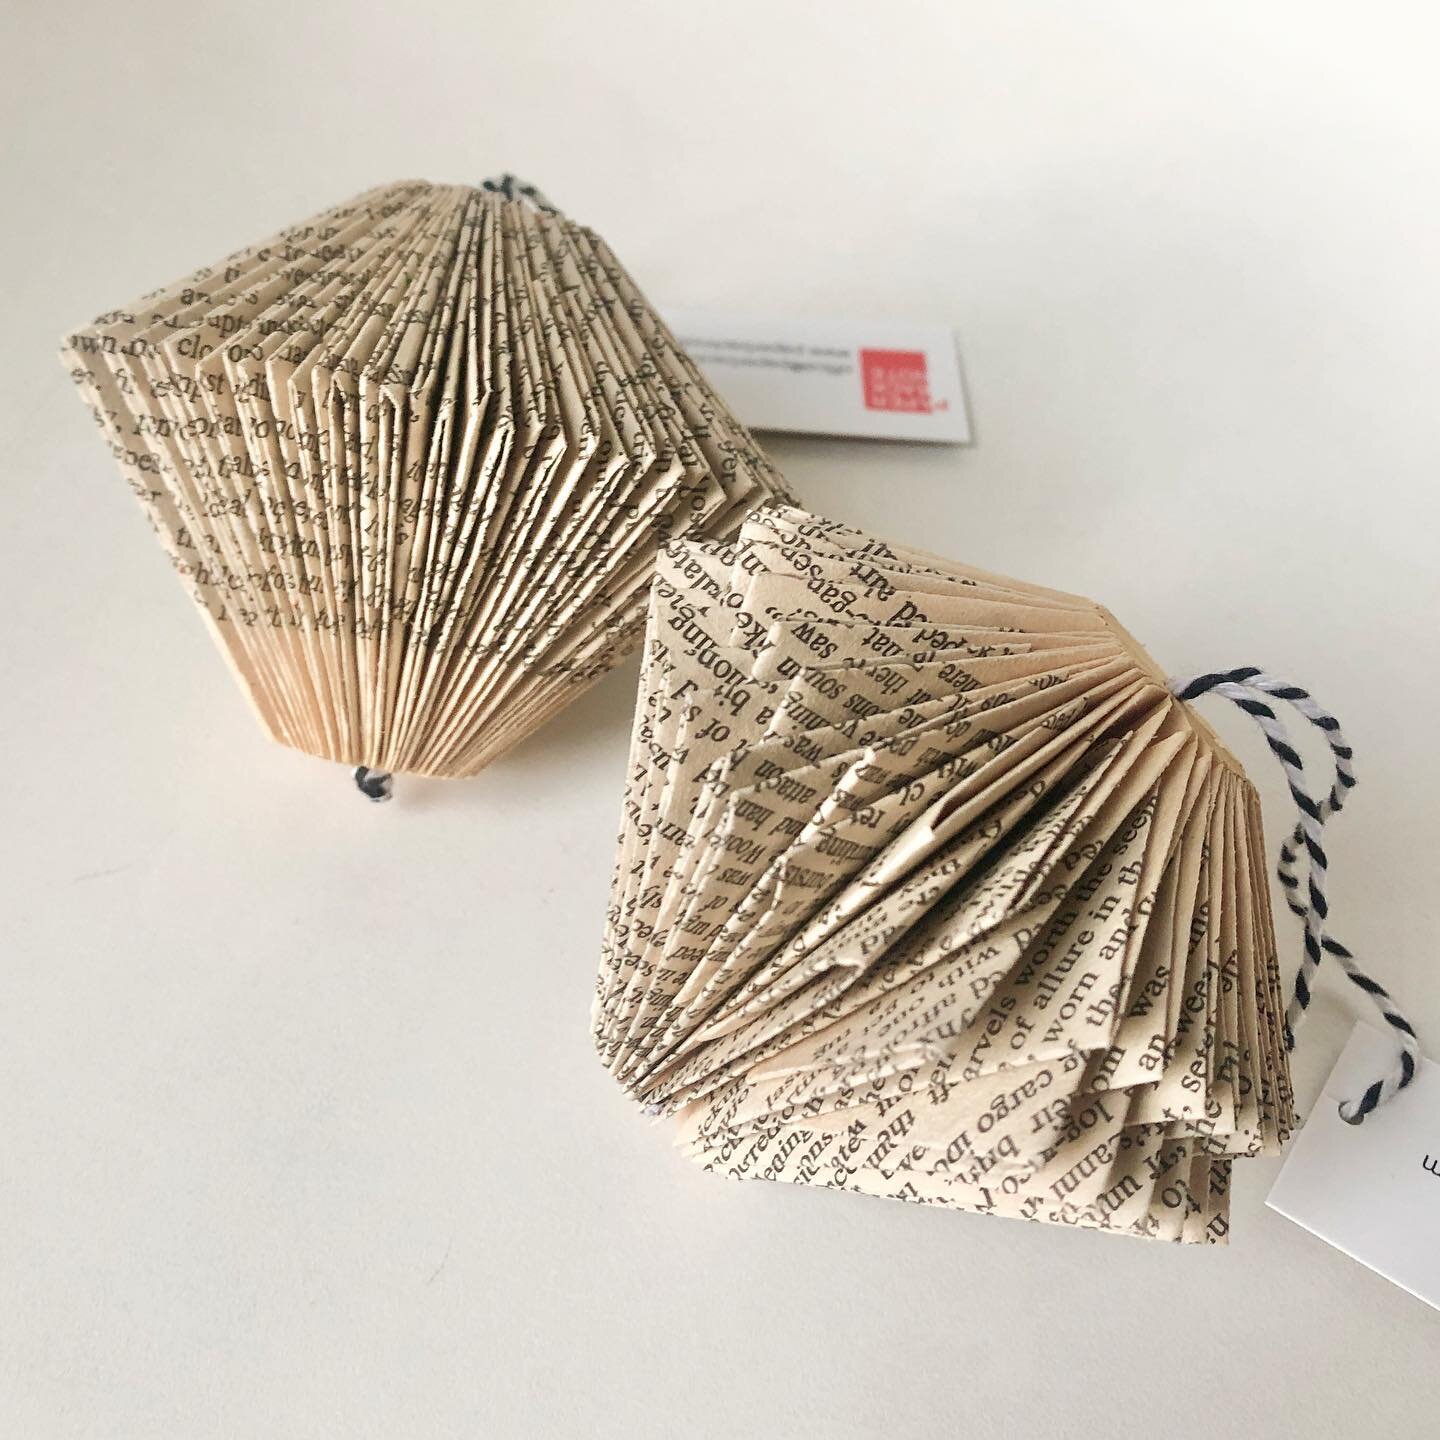 Thank you for support at the @toquecraftfair virtual market! We&rsquo;re prepping items sold after our first day. We still have a few more hanging book art ornaments available.

Our paper ornaments are made from one thickness of an old book. Each pag